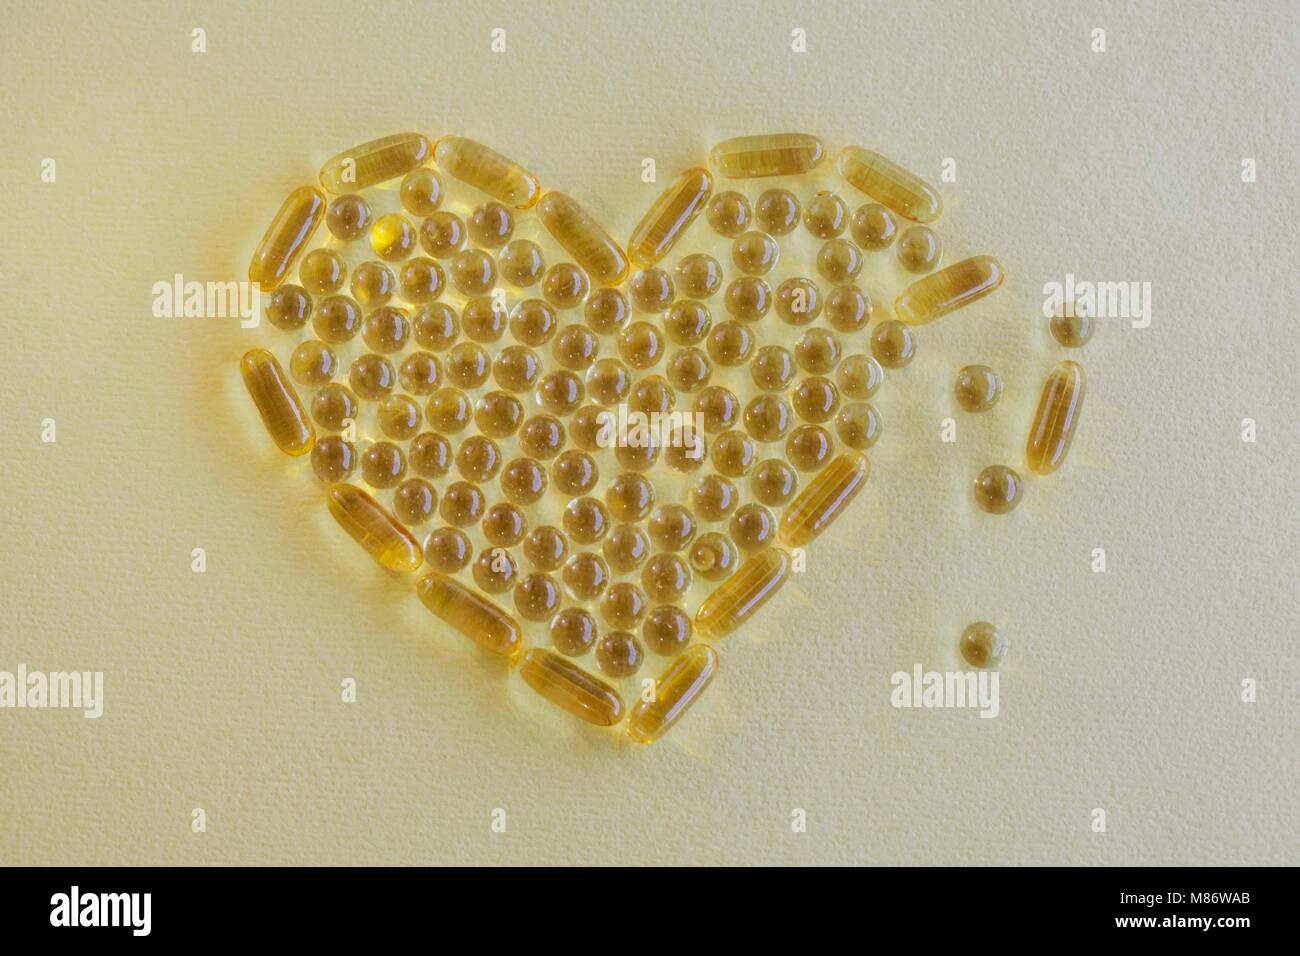 Capsules in a broken heart shape Stock Photo